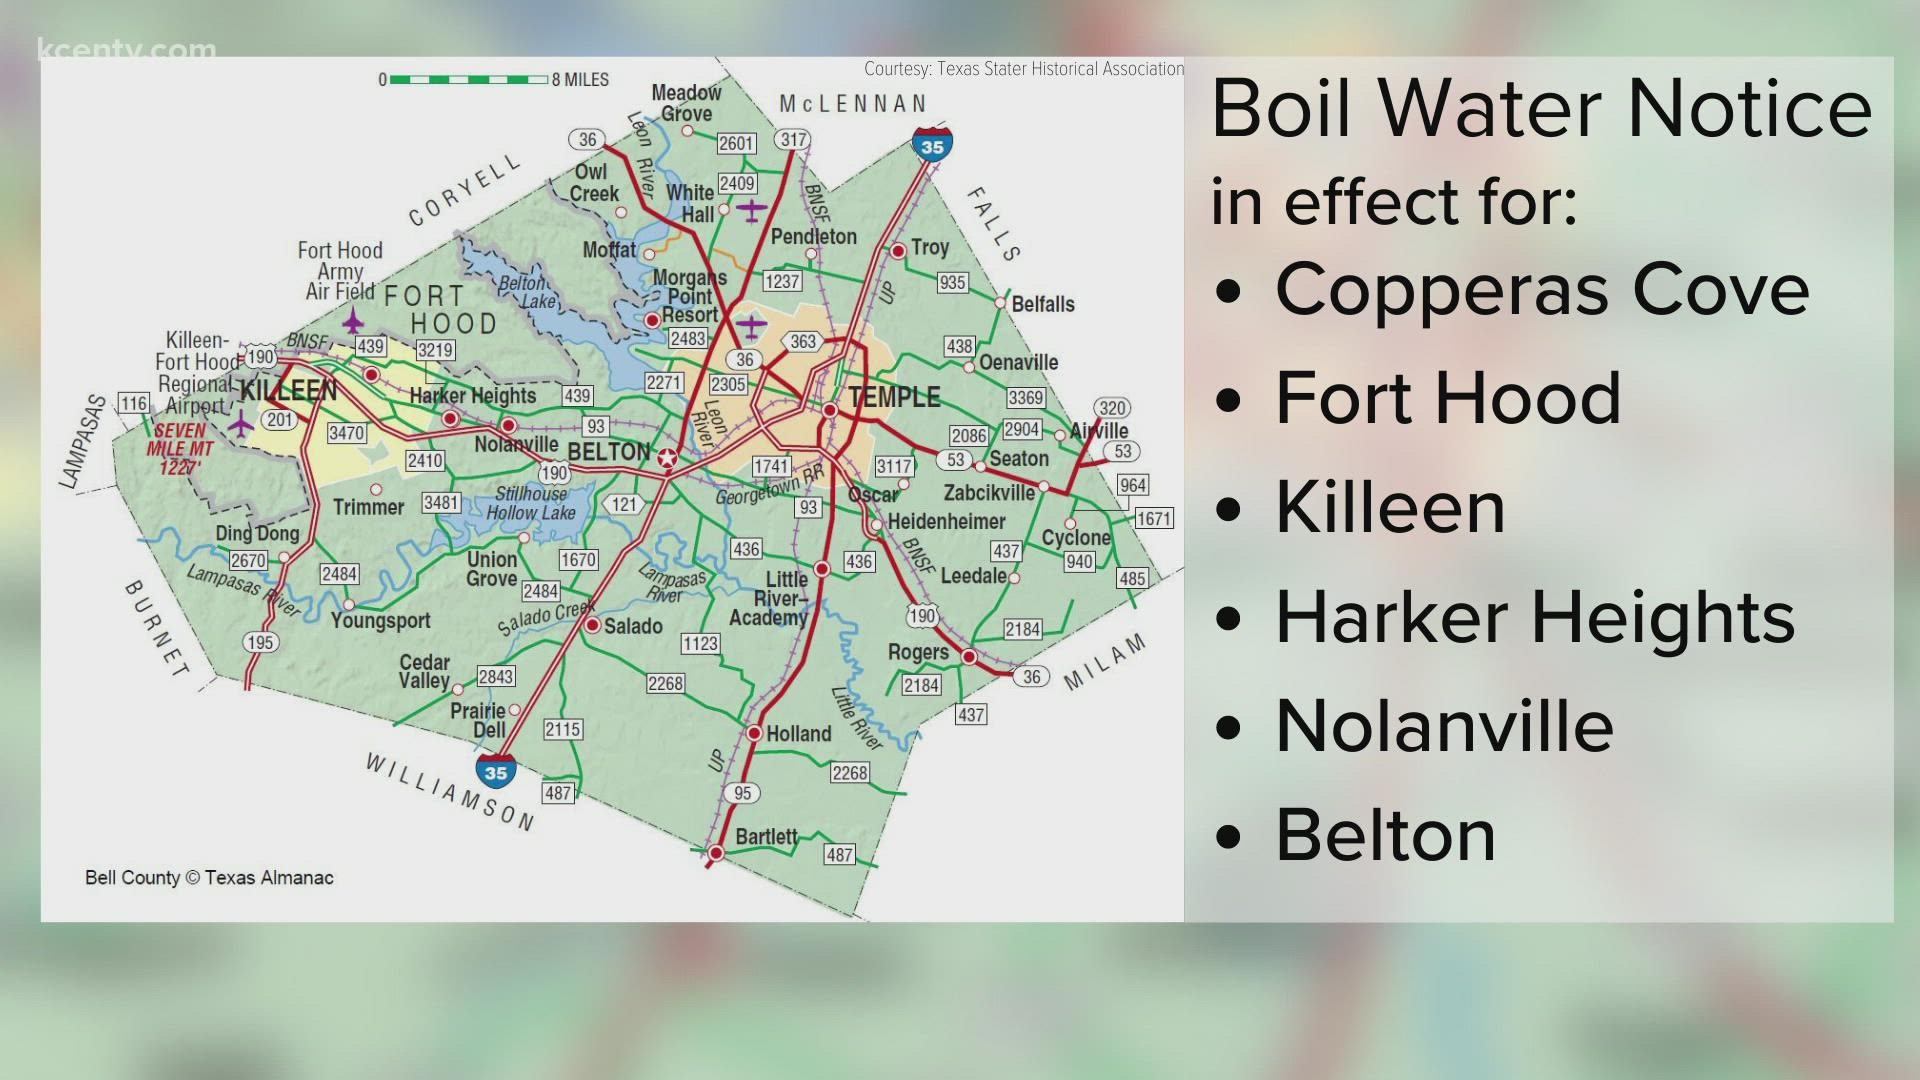 The water boil notice was caused by a loss of pressure in a water main break broke on Saturday.